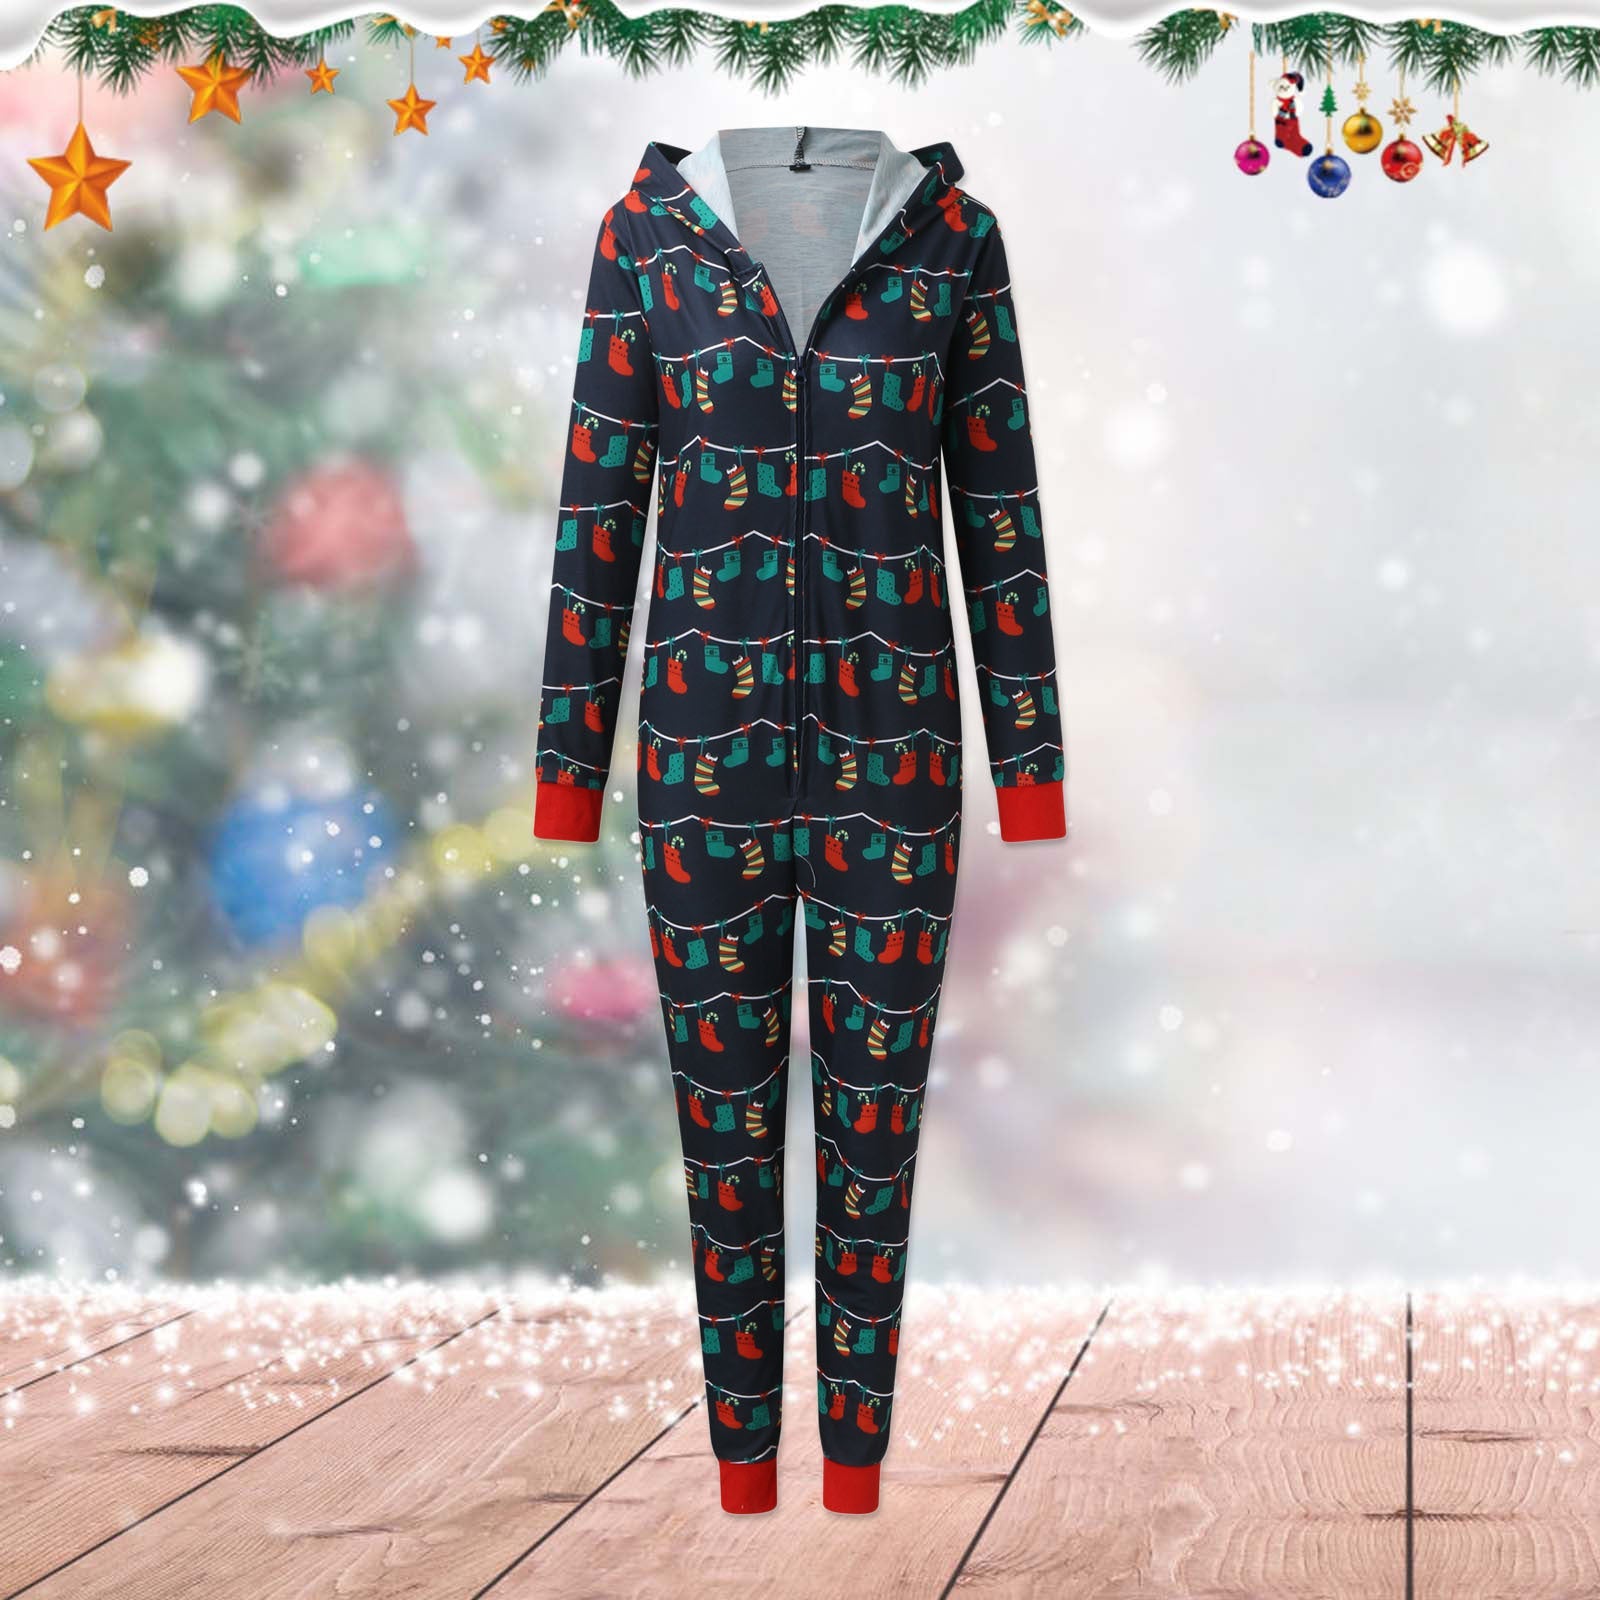 Fashion Adult and Kids Christmas Suits-Suits-Red-Miss-S-Free Shipping Leatheretro